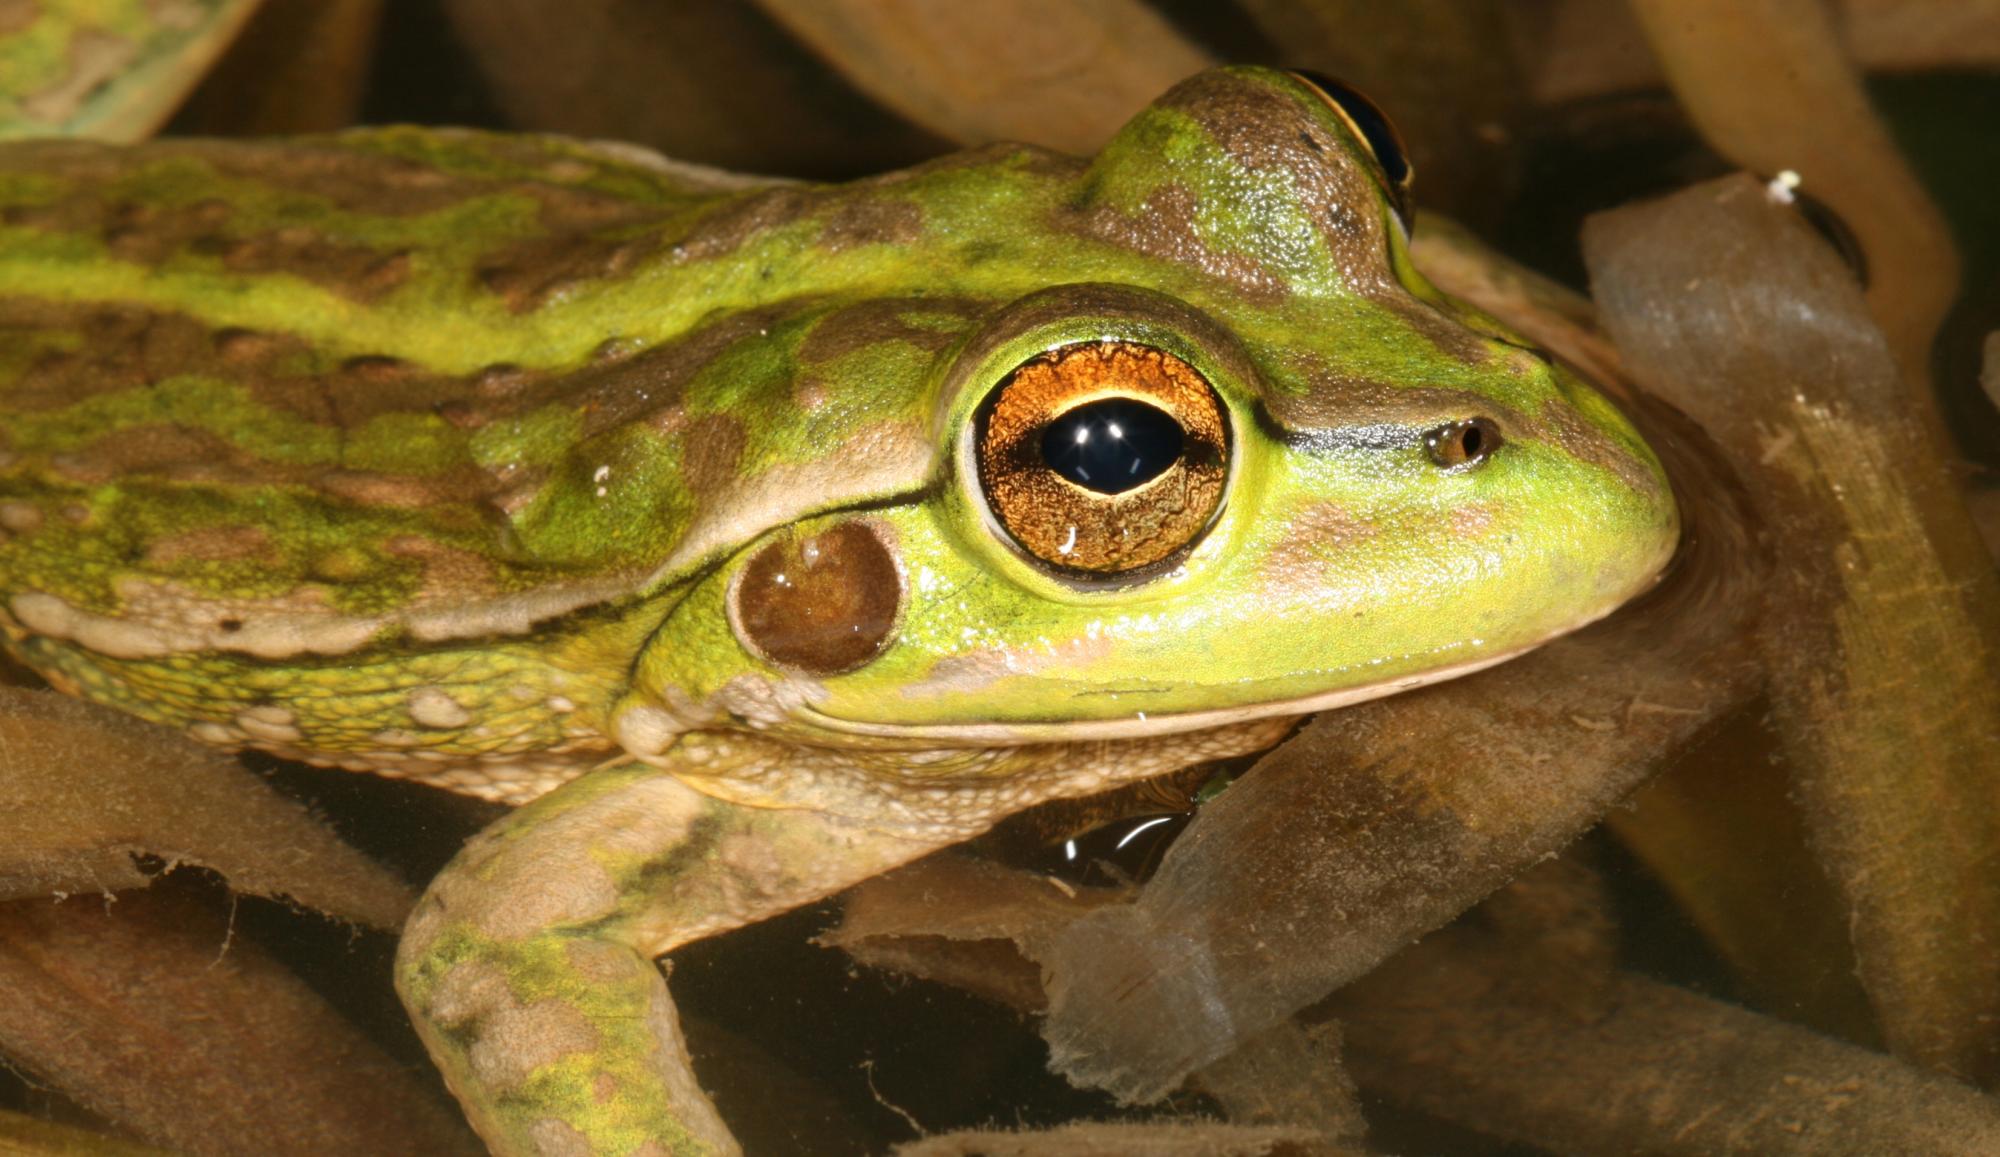 How restoring habitat is saving the endangered yellow-spotted bell frog